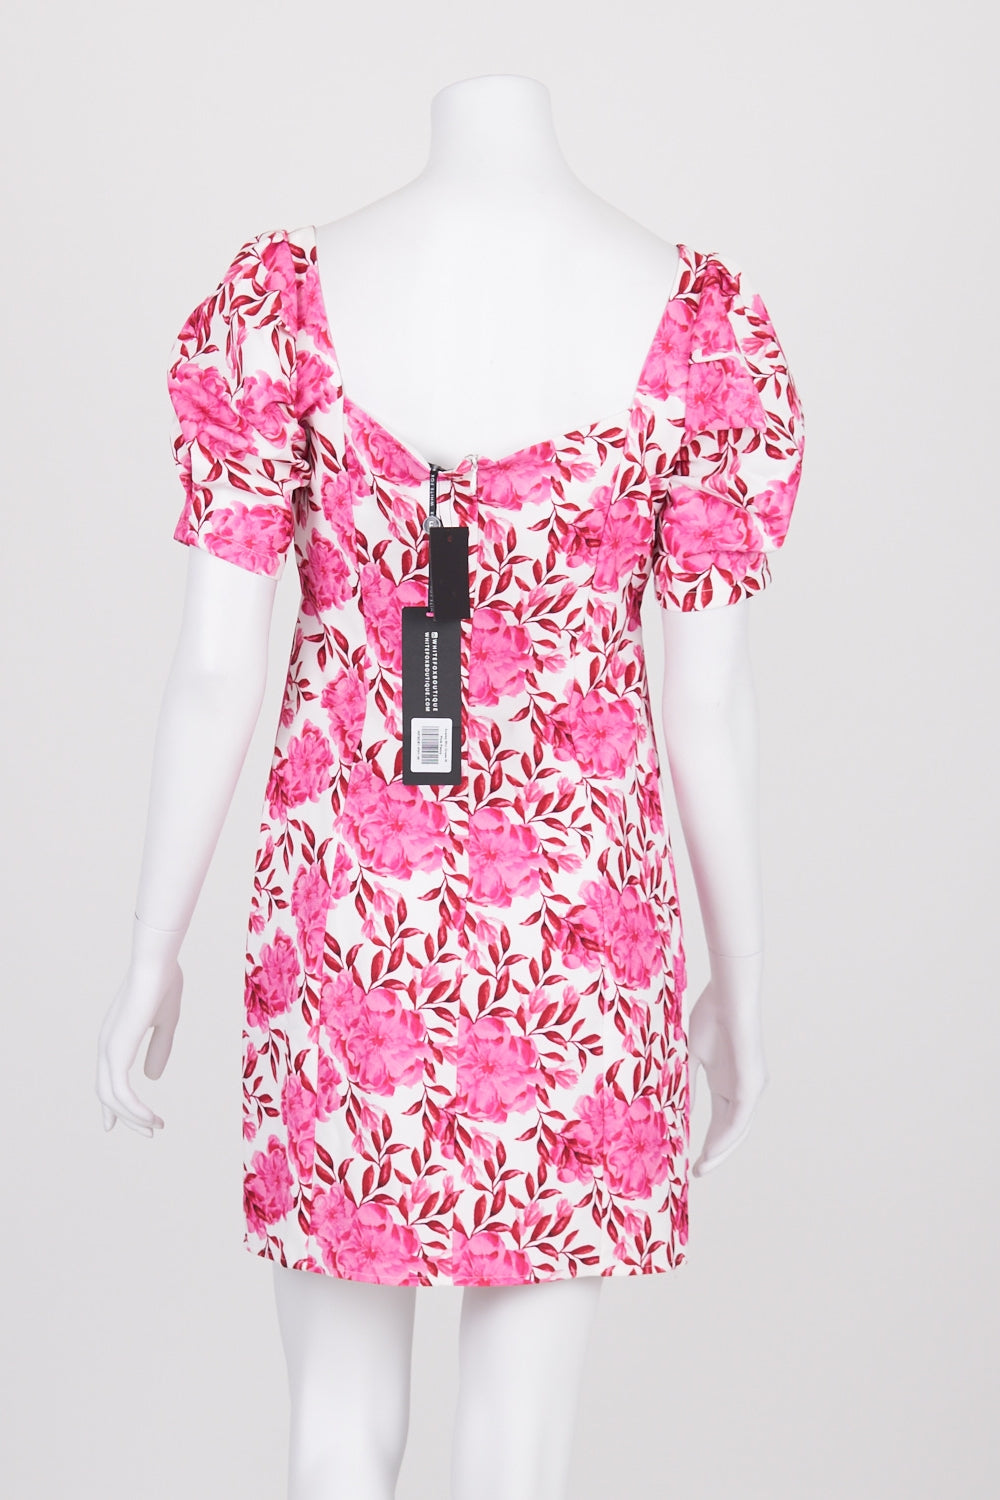 White Fox White and Pink Floral Mini Dress M